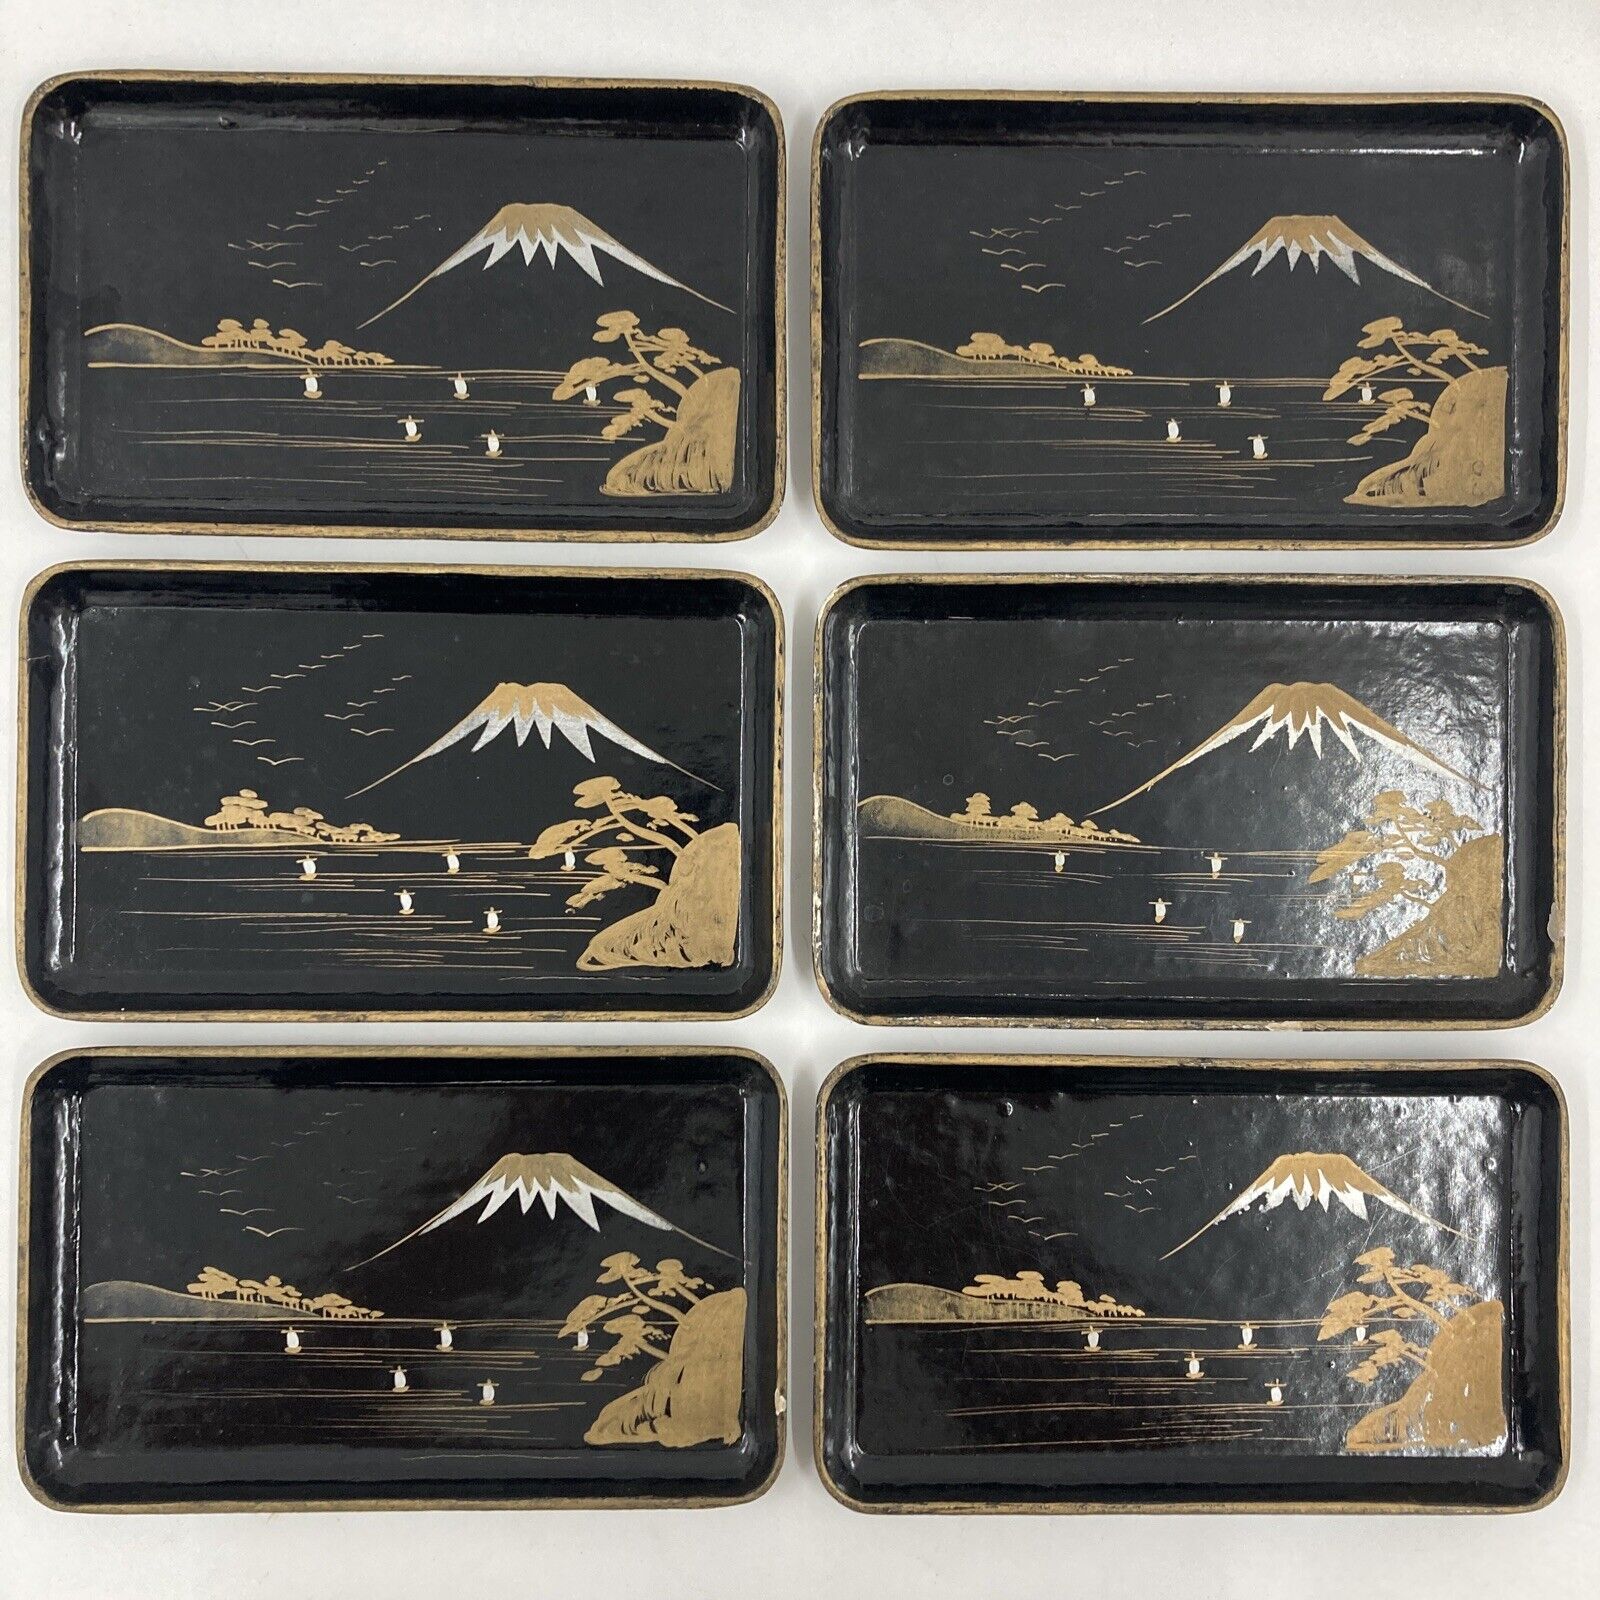 Vintage Set Of 6 Trays Occupied Japan 1945-1951 Mount Fuji Scenic Black Lacquer